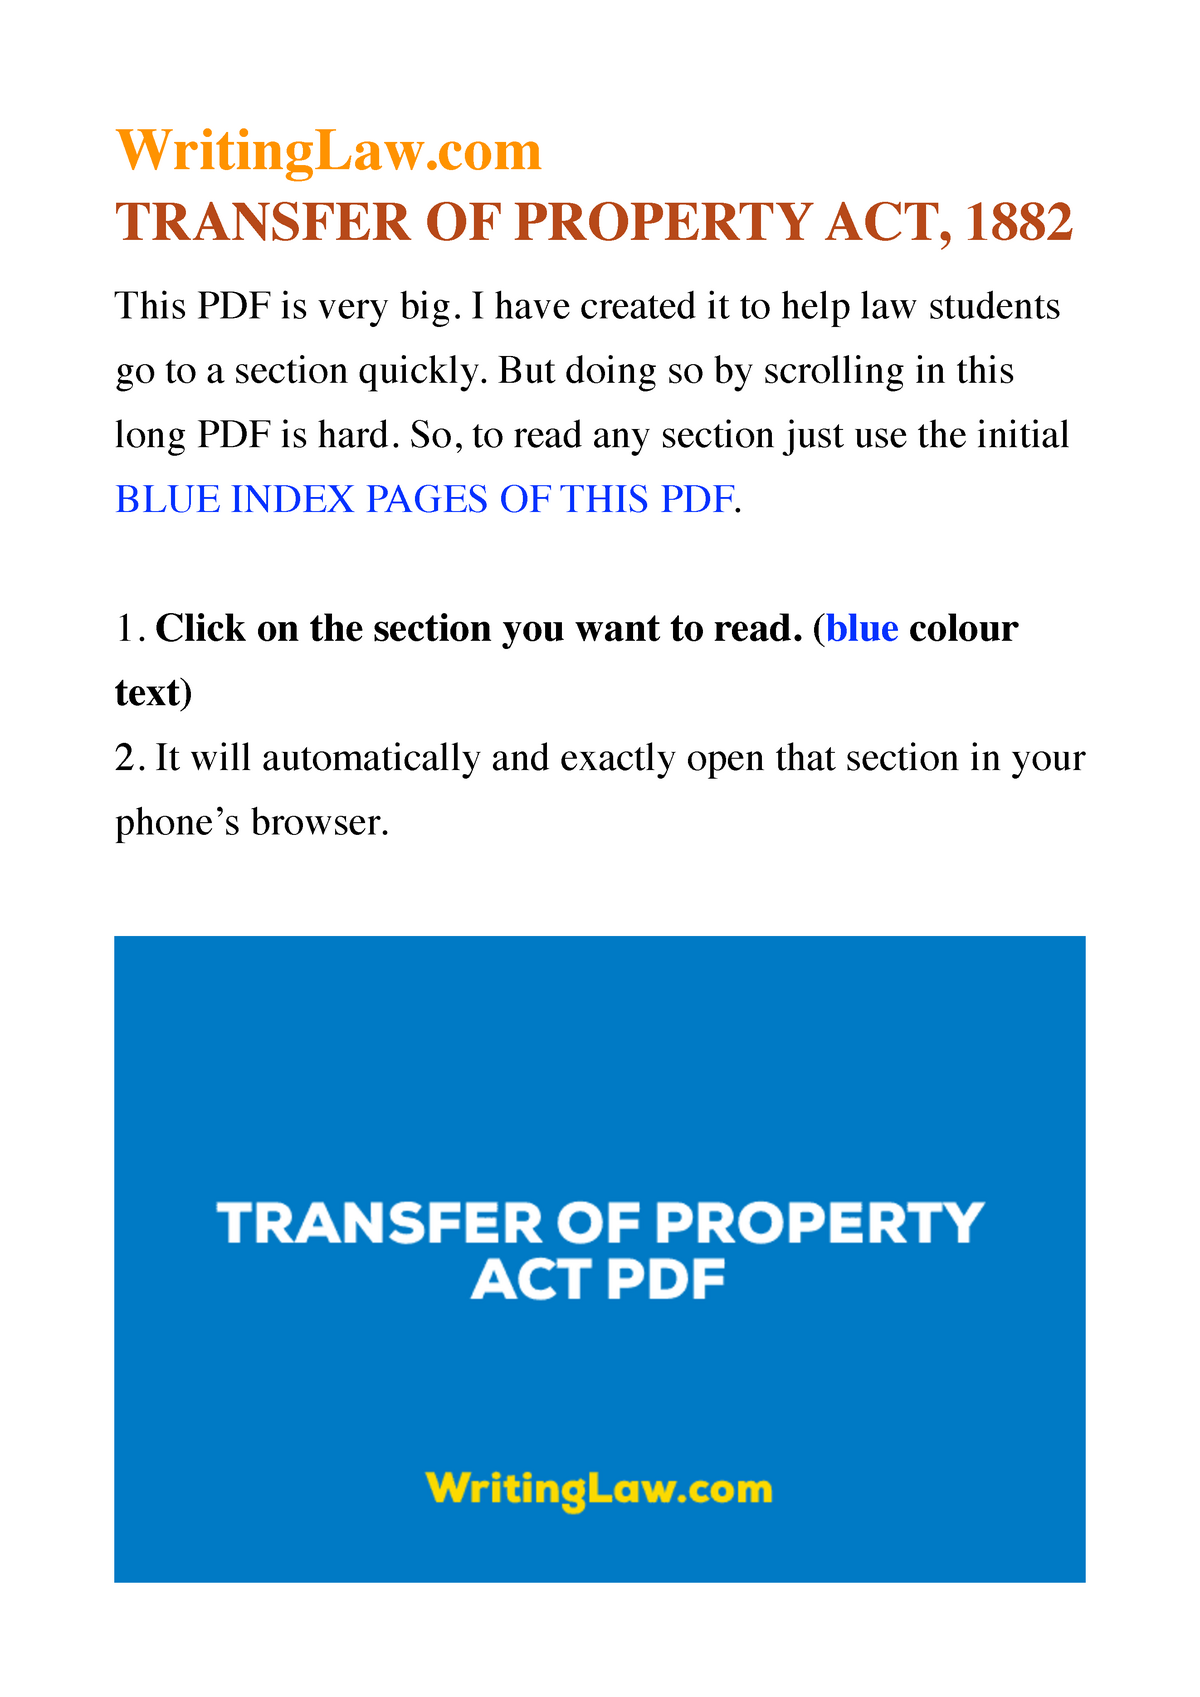 transfer of property act 1882 in bangla pdf